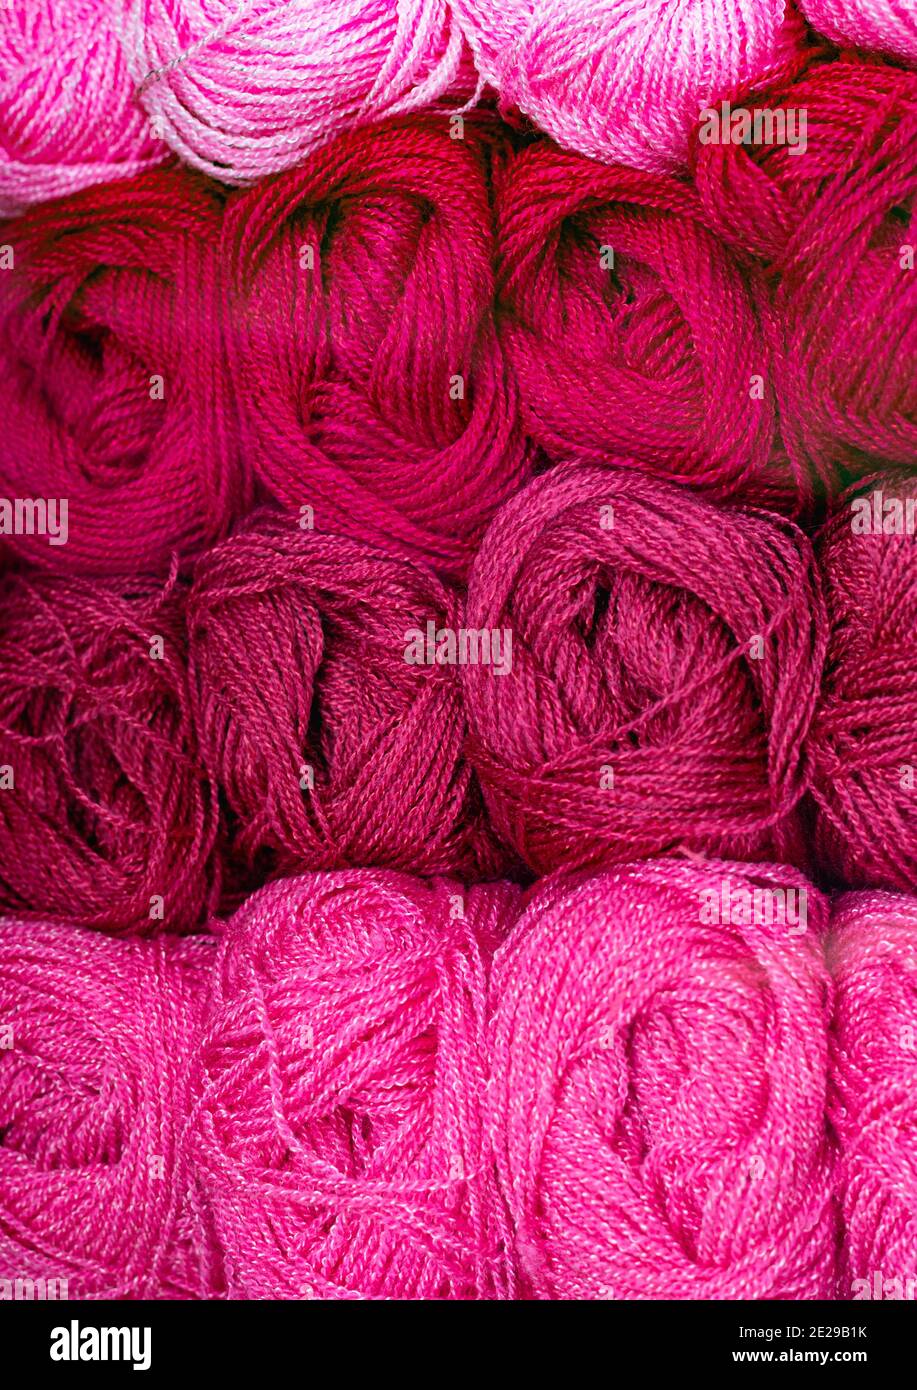 Different shades of pink yarn,  close up. Stock Photo